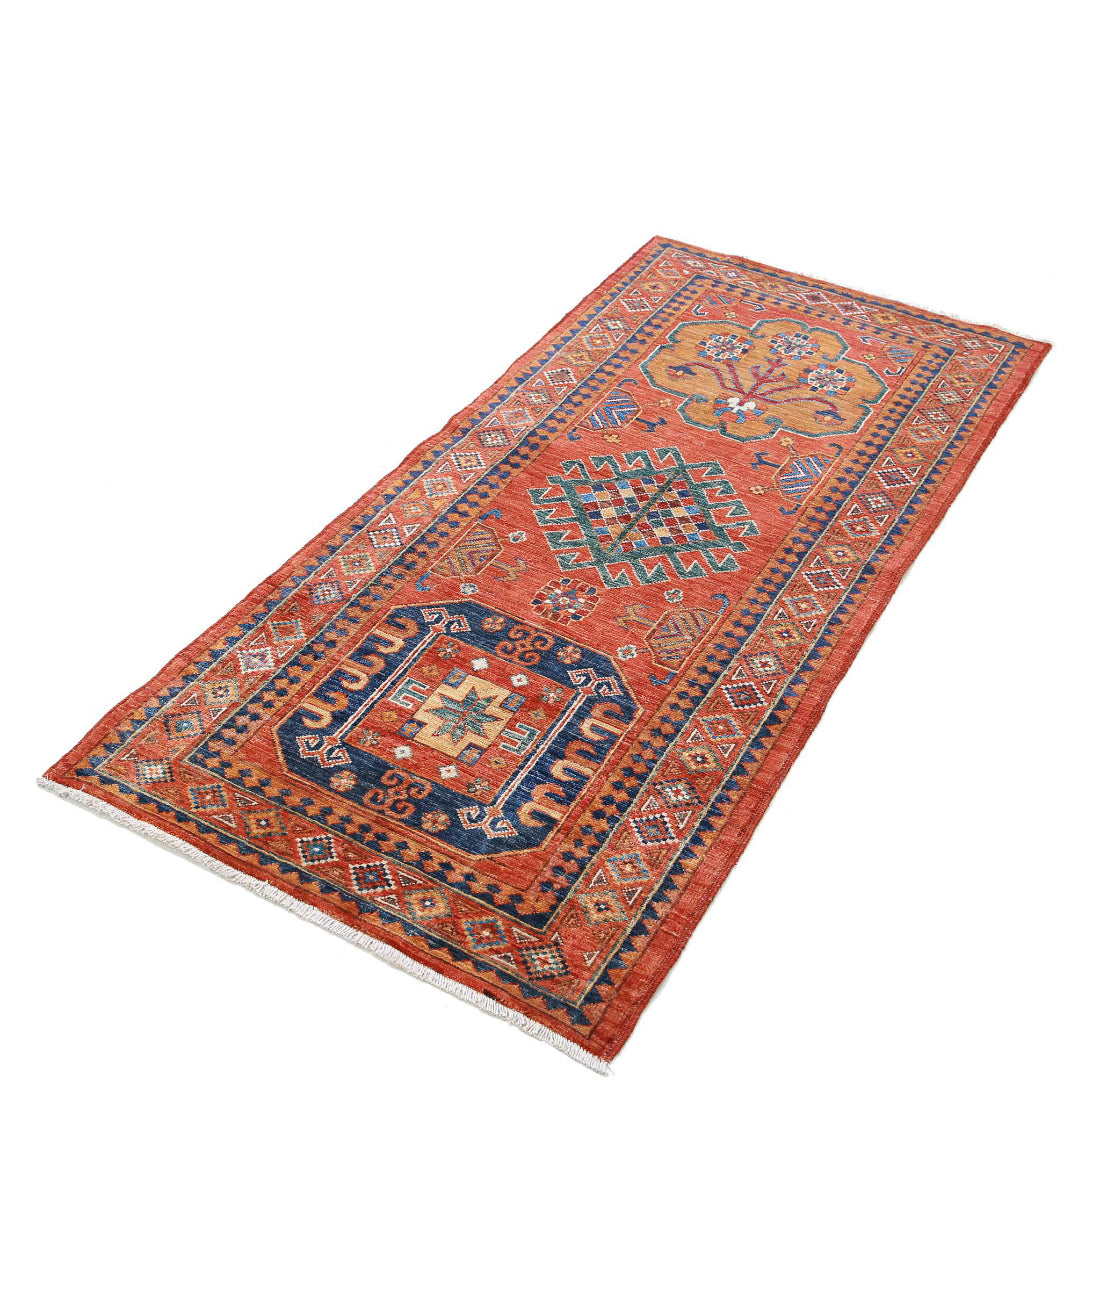 Hand Knotted Nomadic Caucasian Humna Wool Rug - 2'8'' x 5'9'' 2'8'' x 5'9'' (80 X 173) / Rust / Gold